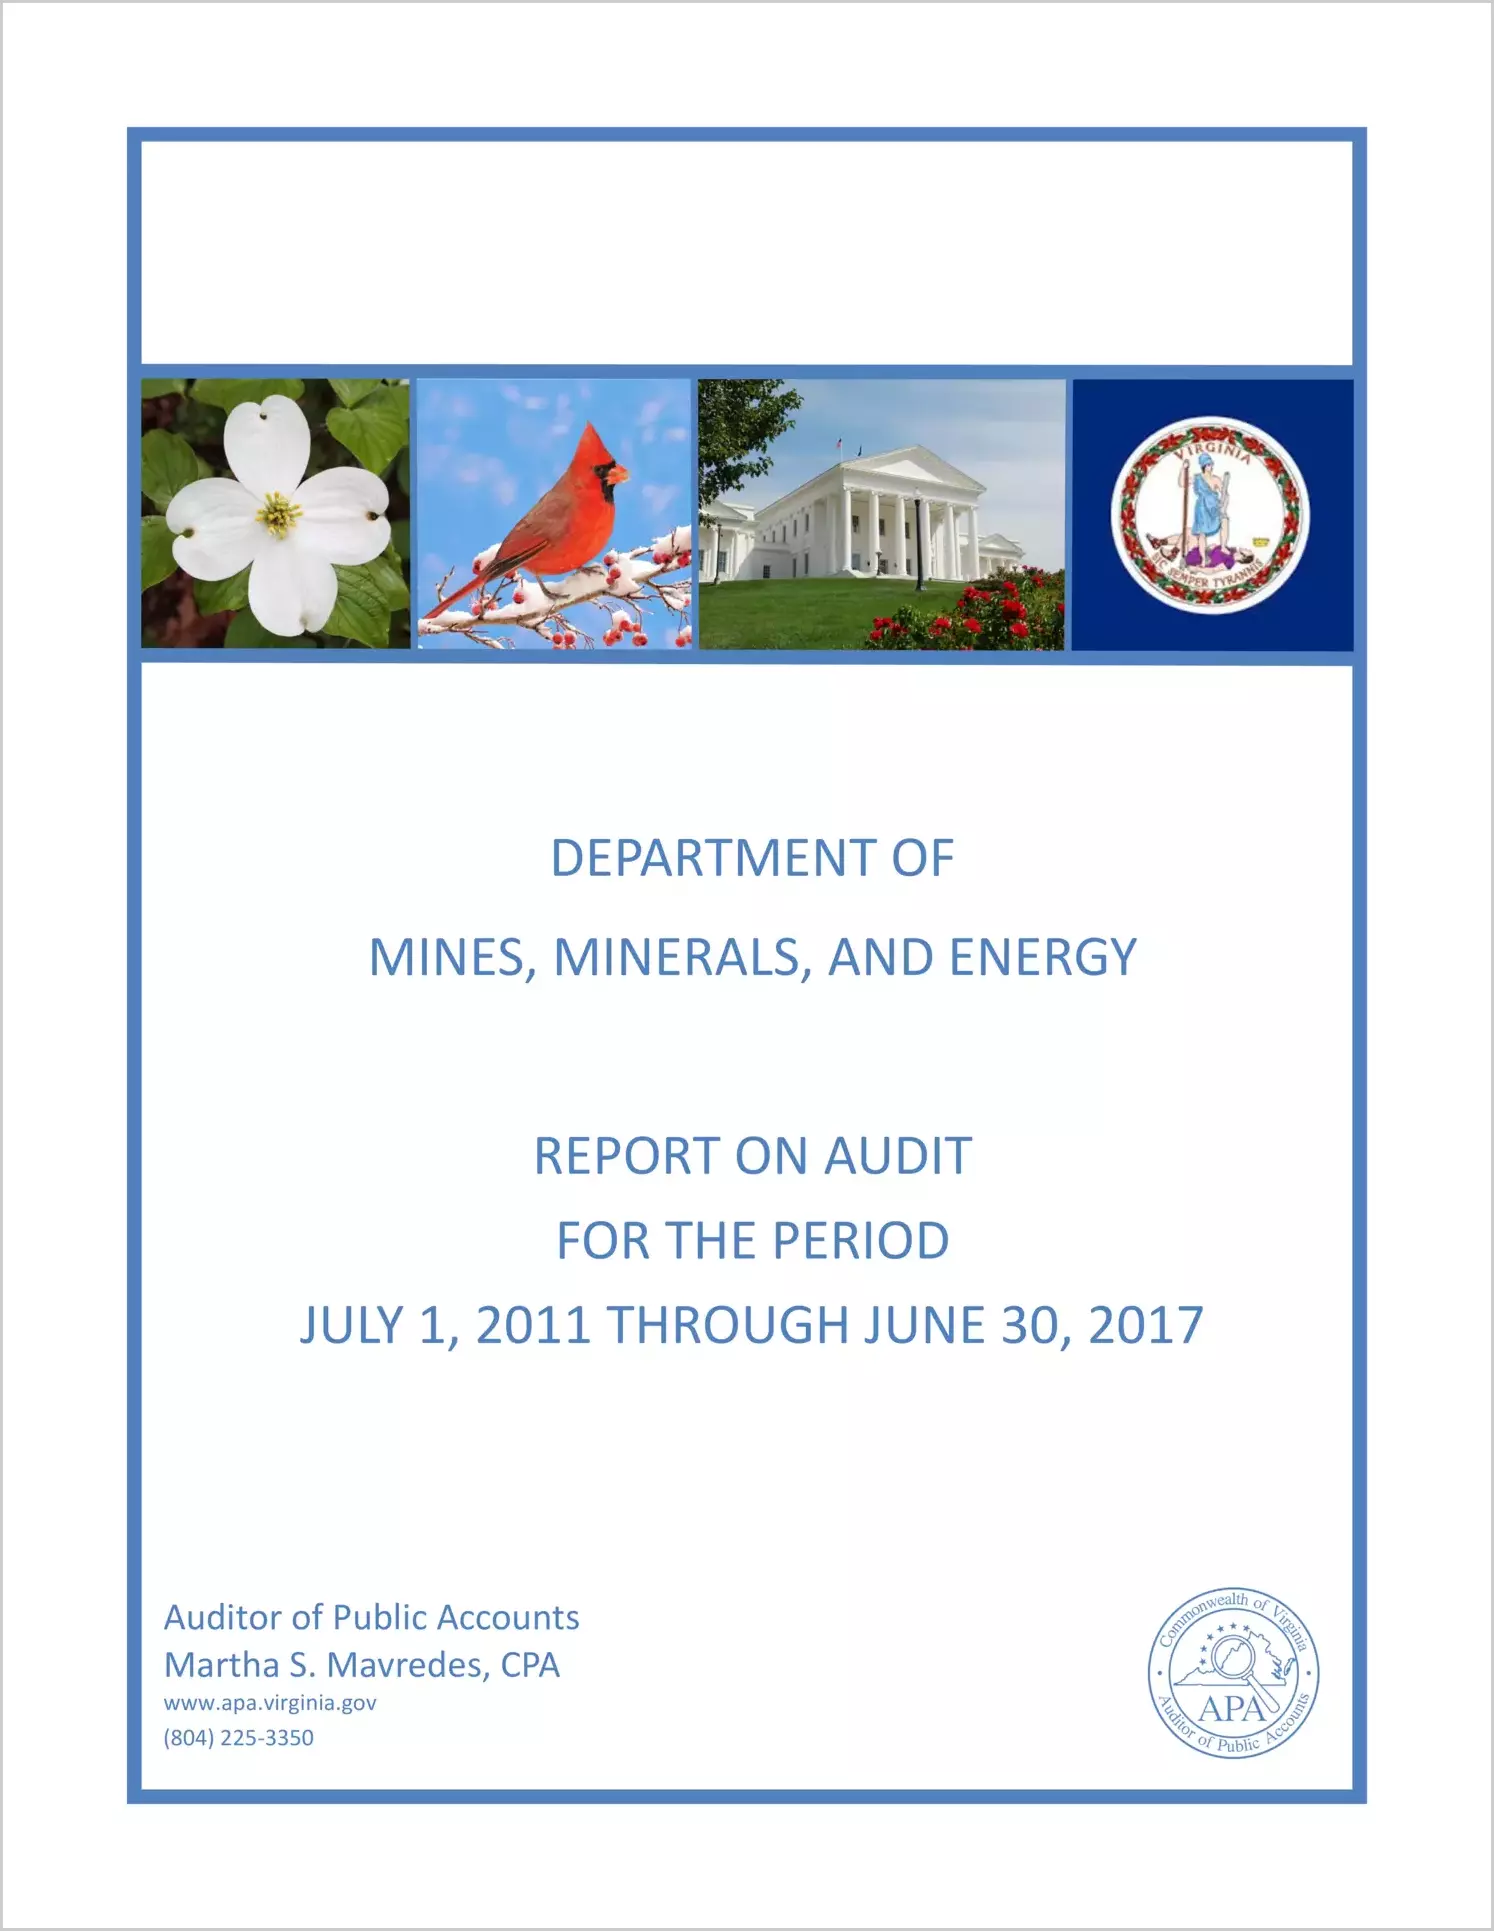 Department of Mines, Minerals, and Energy for the period July 1, 2011 through June 30, 2017